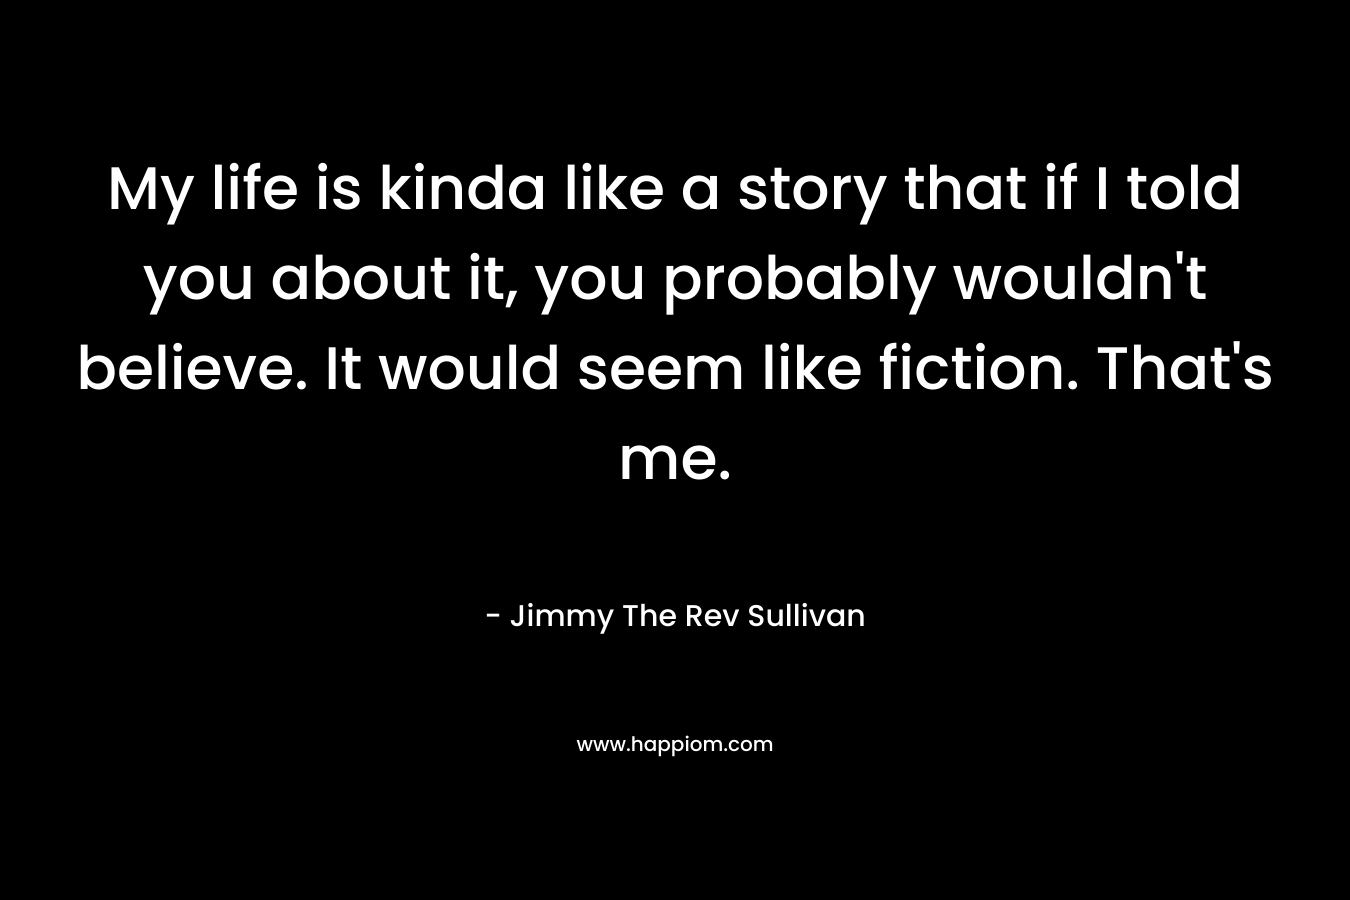 My life is kinda like a story that if I told you about it, you probably wouldn’t believe. It would seem like fiction. That’s me. – Jimmy The Rev Sullivan